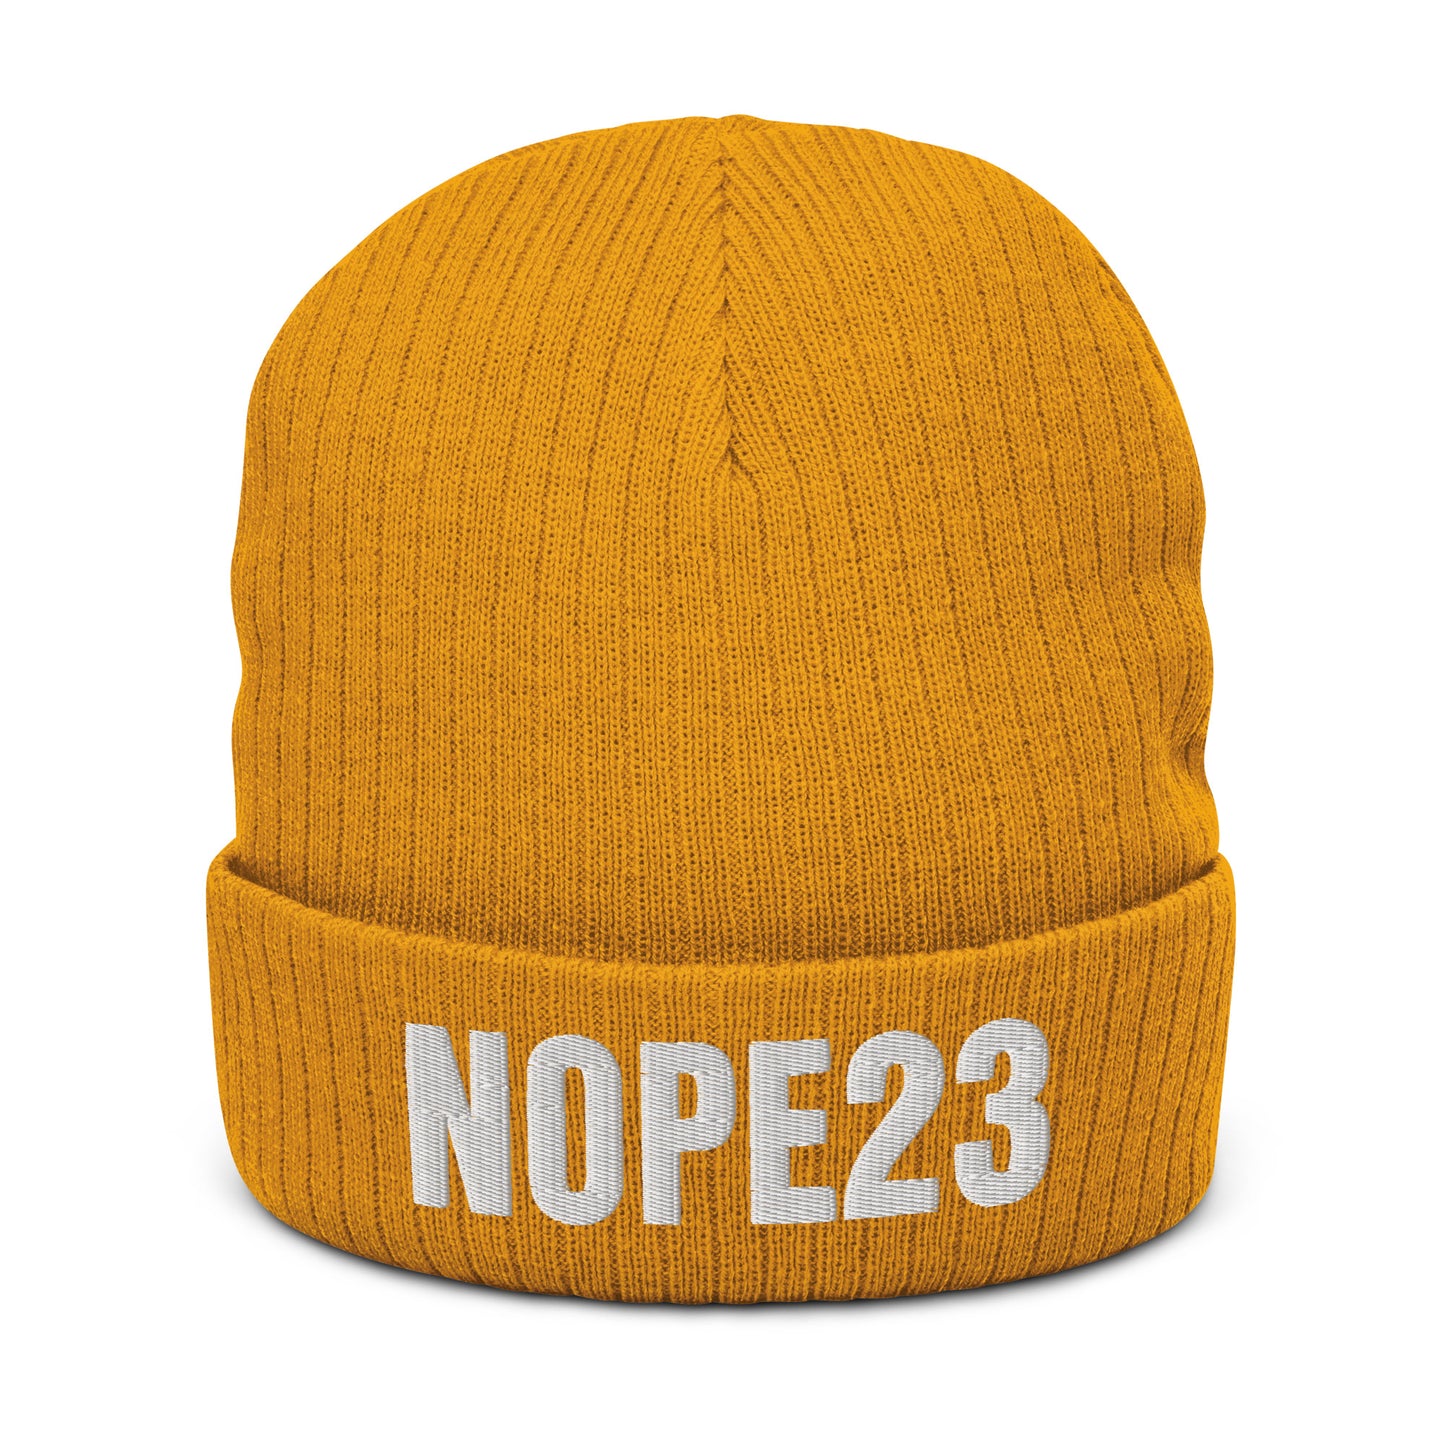 N23 MUSTY Ribbed knit beanie